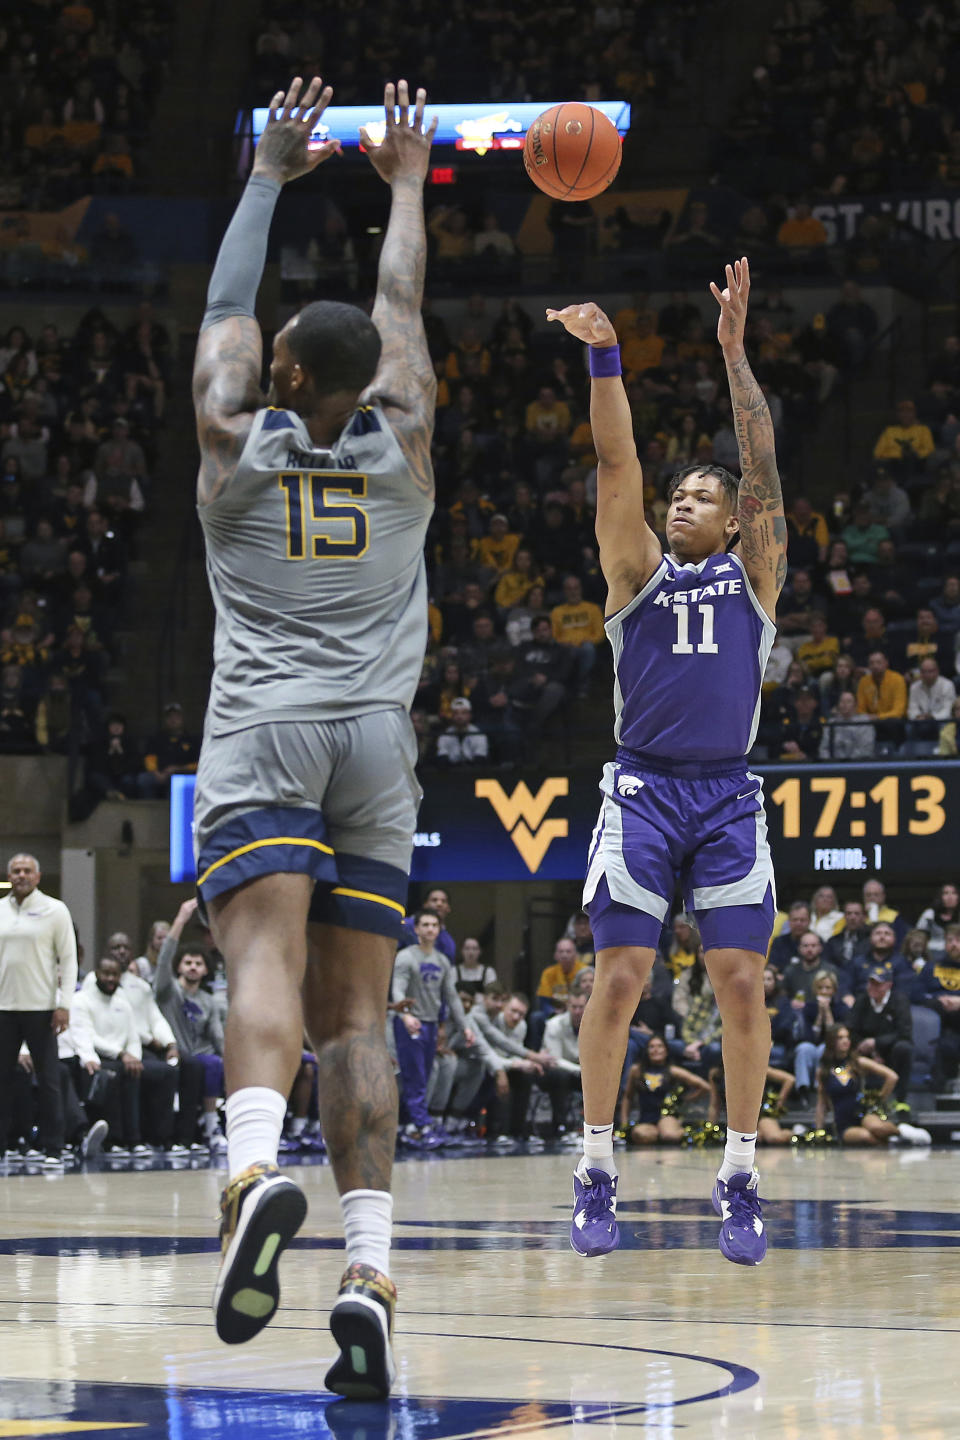 Kansas State forward Keyontae Johnson (11) shoots over West Virginia forward Jimmy Bell Jr. (15) during the first half of an NCAA college basketball game on Saturday, March 4, 2023, in Morgantown, W.Va. (AP Photo/Kathleen Batten)